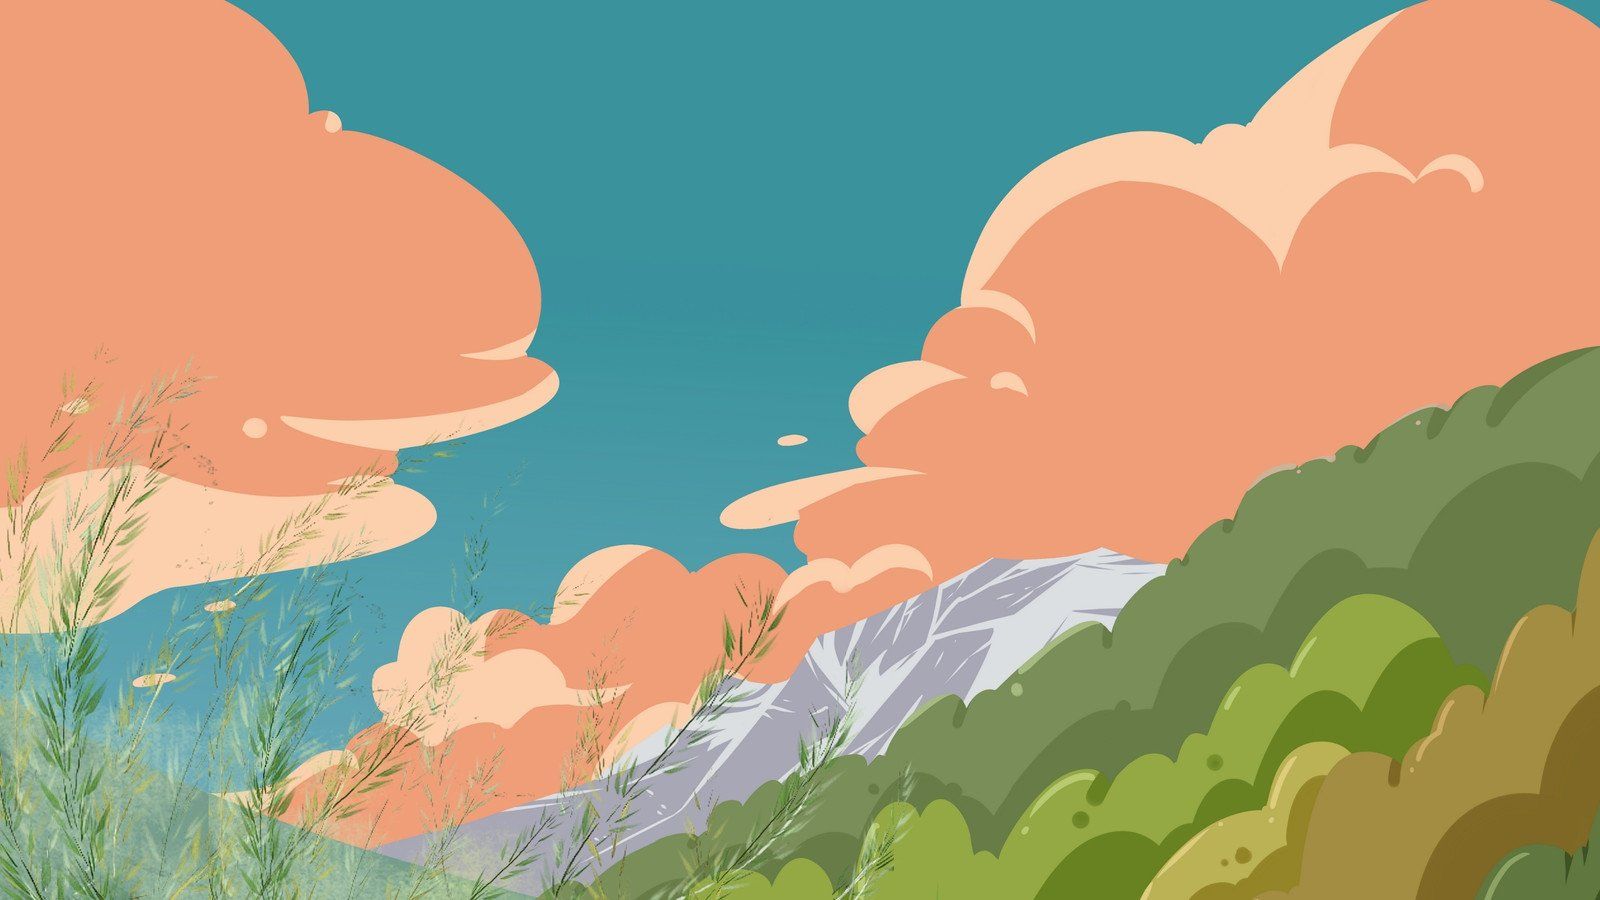 A digital illustration of a landscape with a mountain range, pink clouds, and a blue sky. - Nature